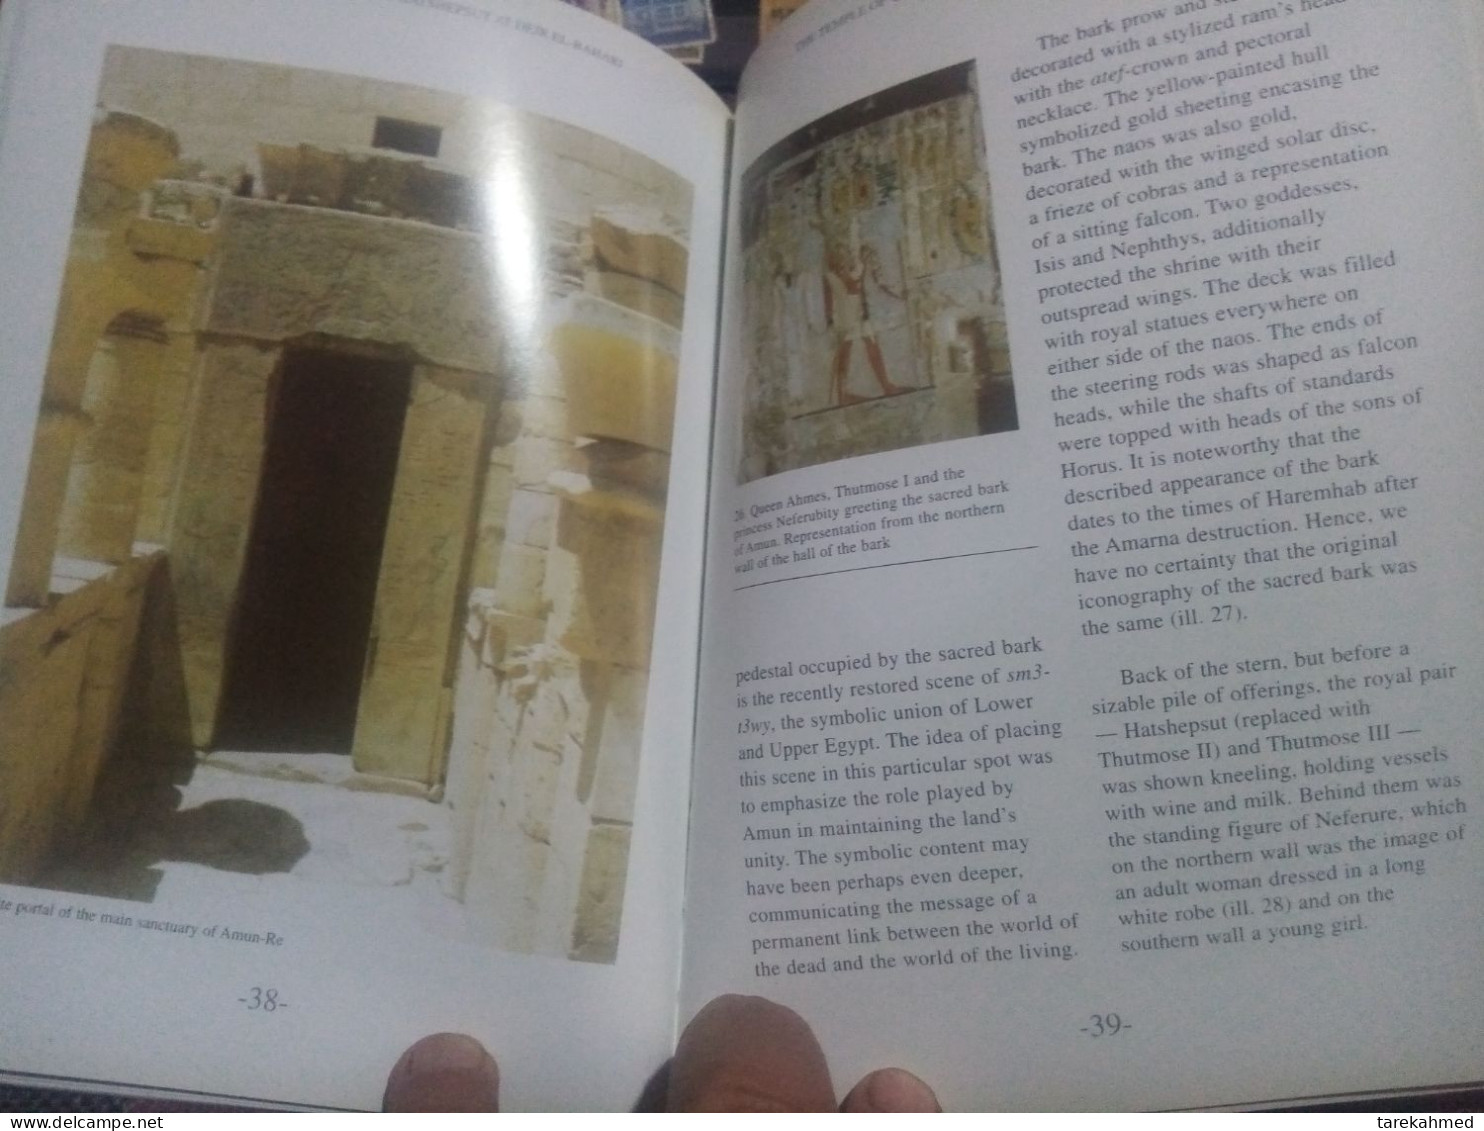 Egypt 2000, Booklet & Catalog of the Temple of Hatshepsut, Dier bahary, Luxor, 47 page, Dolab